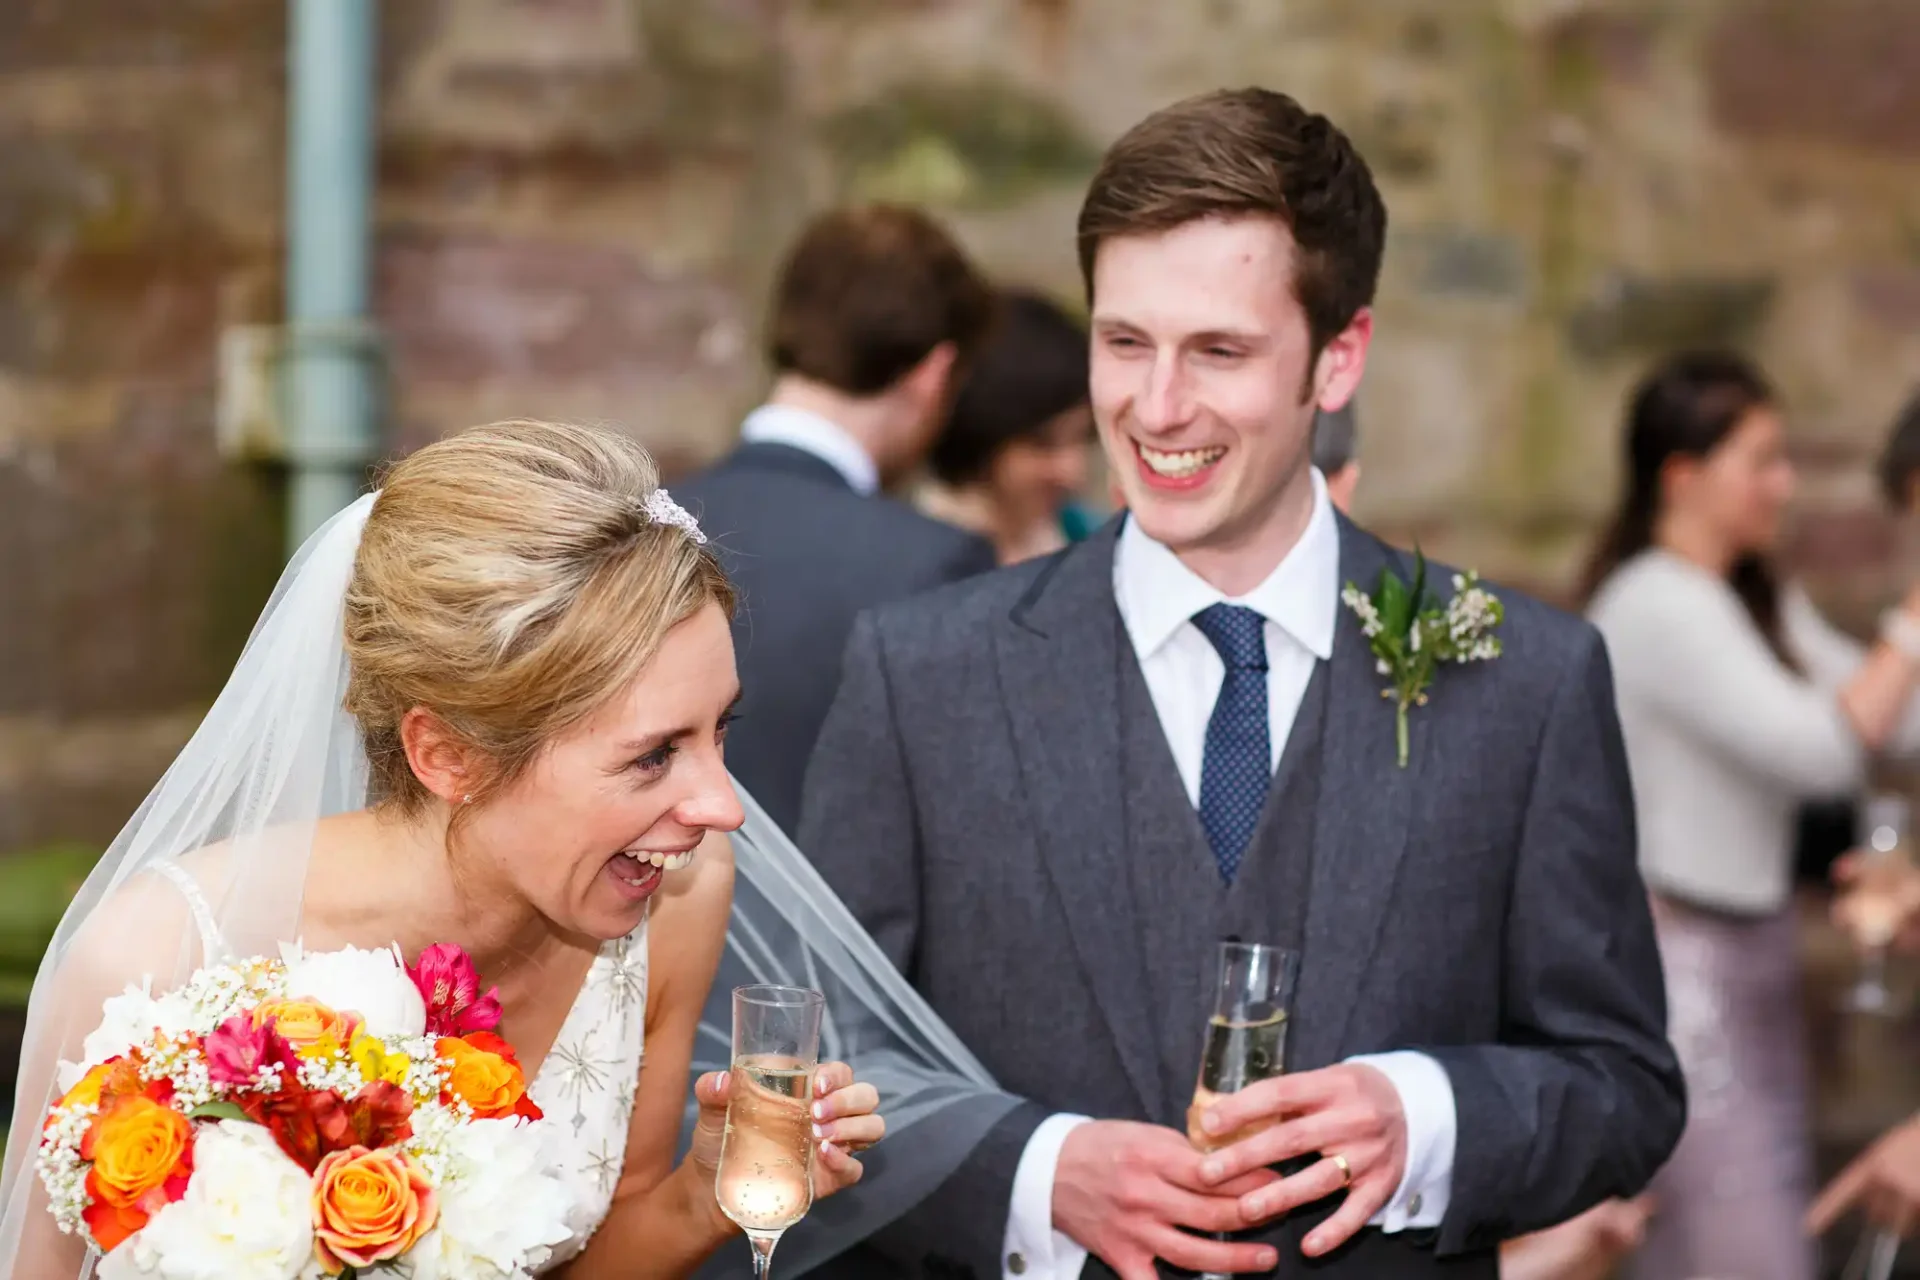 Bride and groom smiling and holding champagne glasses at a wedding reception, surrounded by guests.